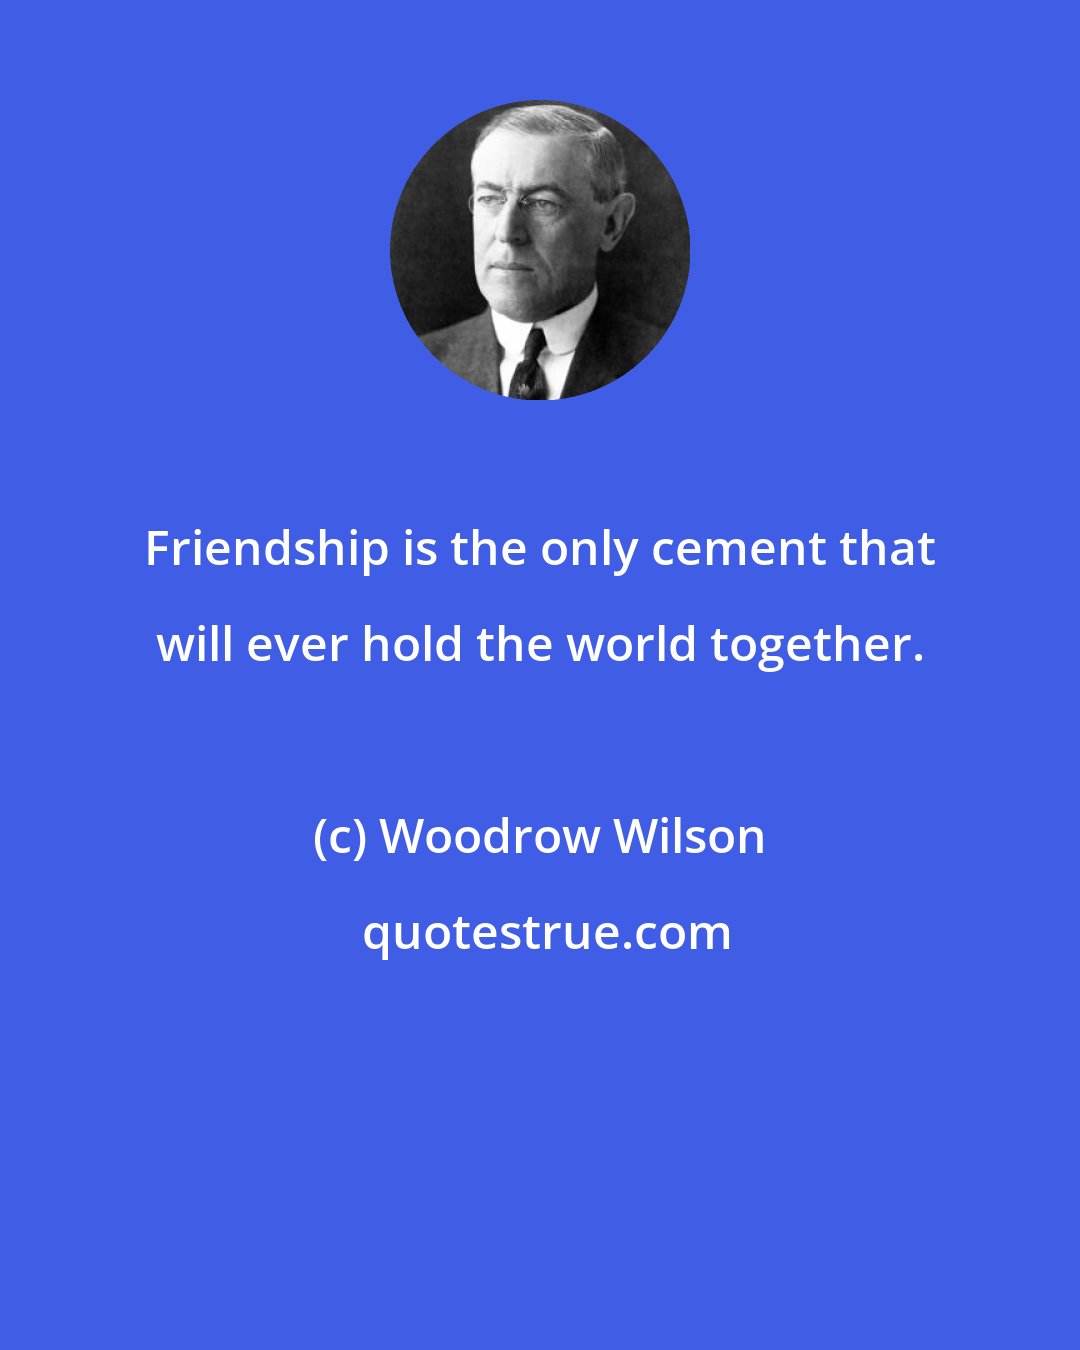 Woodrow Wilson: Friendship is the only cement that will ever hold the world together.